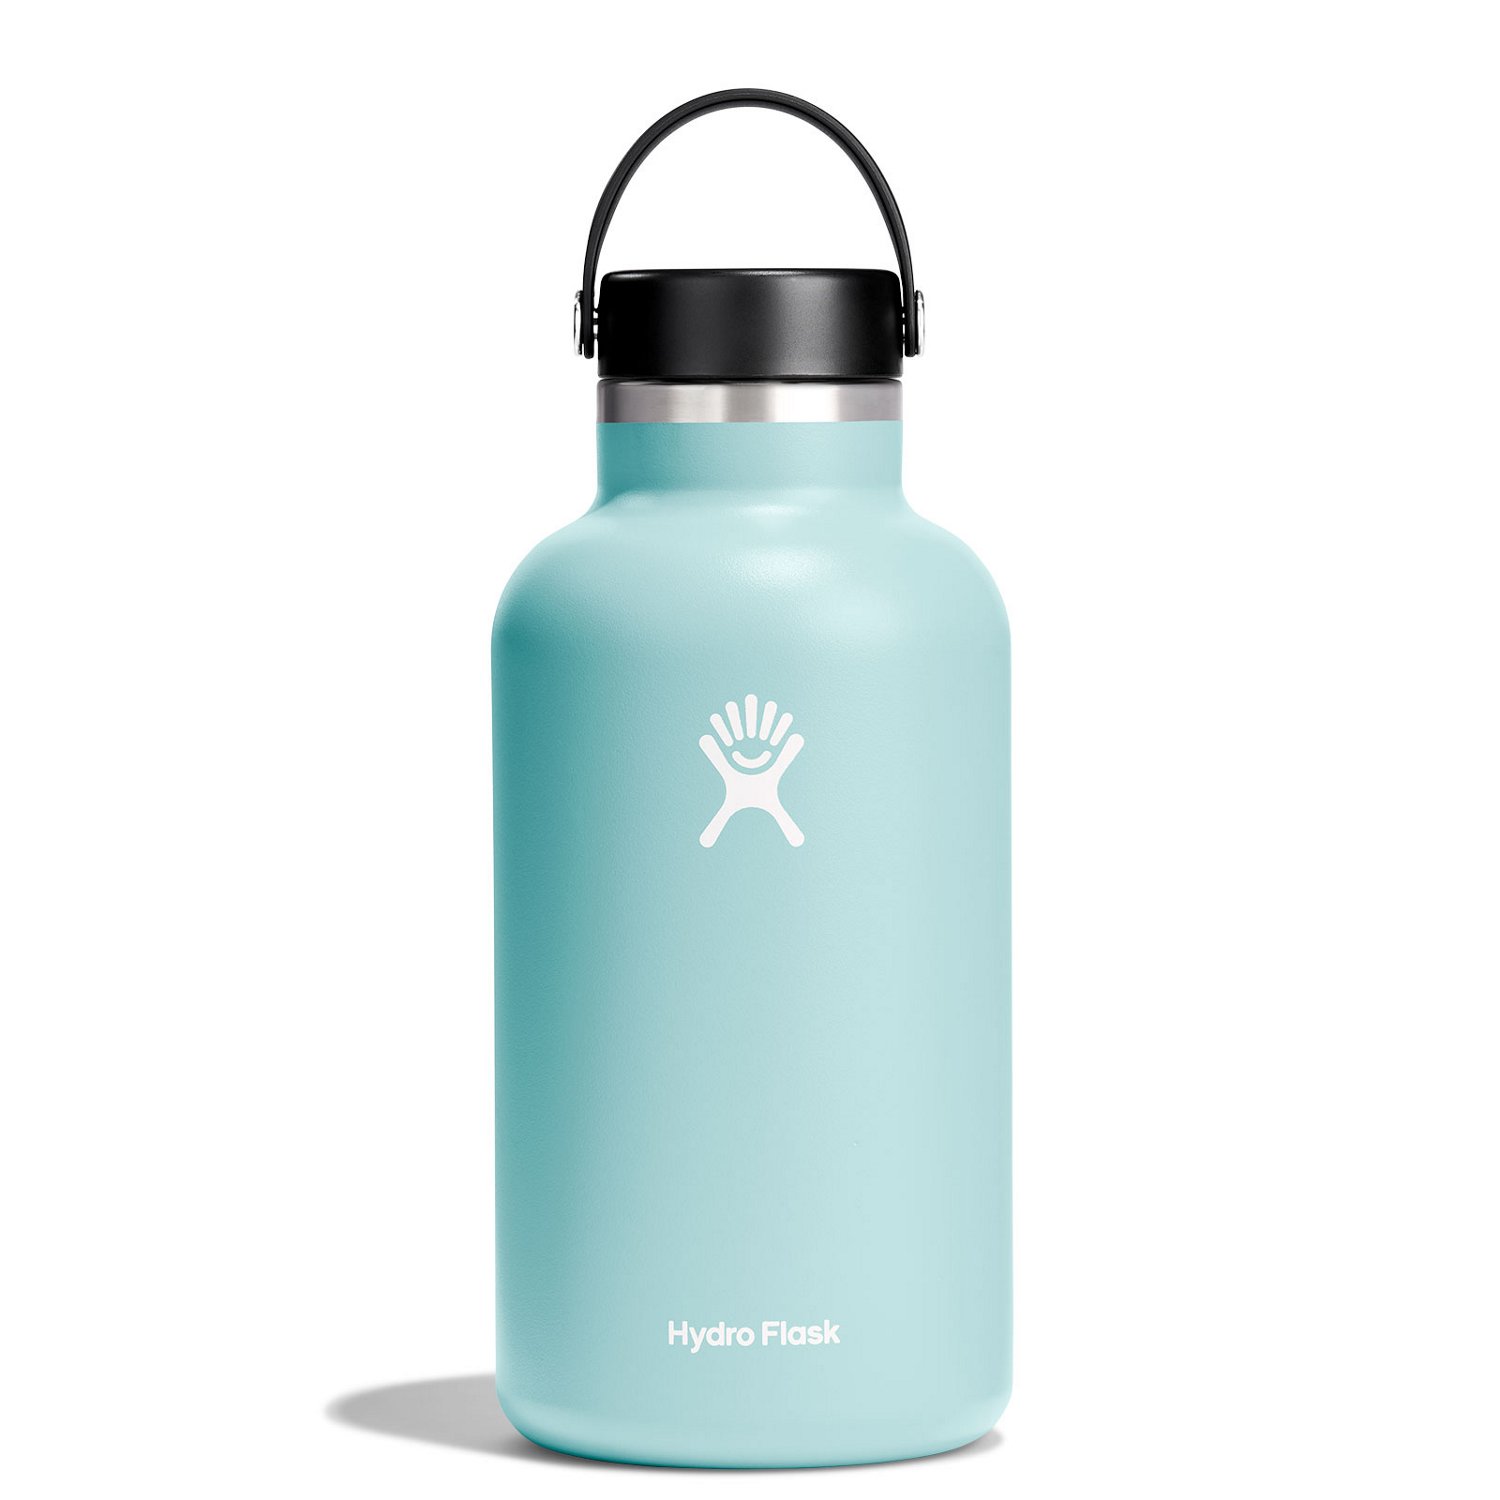 https://academy.scene7.com/is/image/academy///camping/drinkware/blue_hydro-flask-64-oz-wide-mouth-flex-cap-water-bottle_w64bts441/fc6adb3bbf484b879fd68e2e70b2a1d7